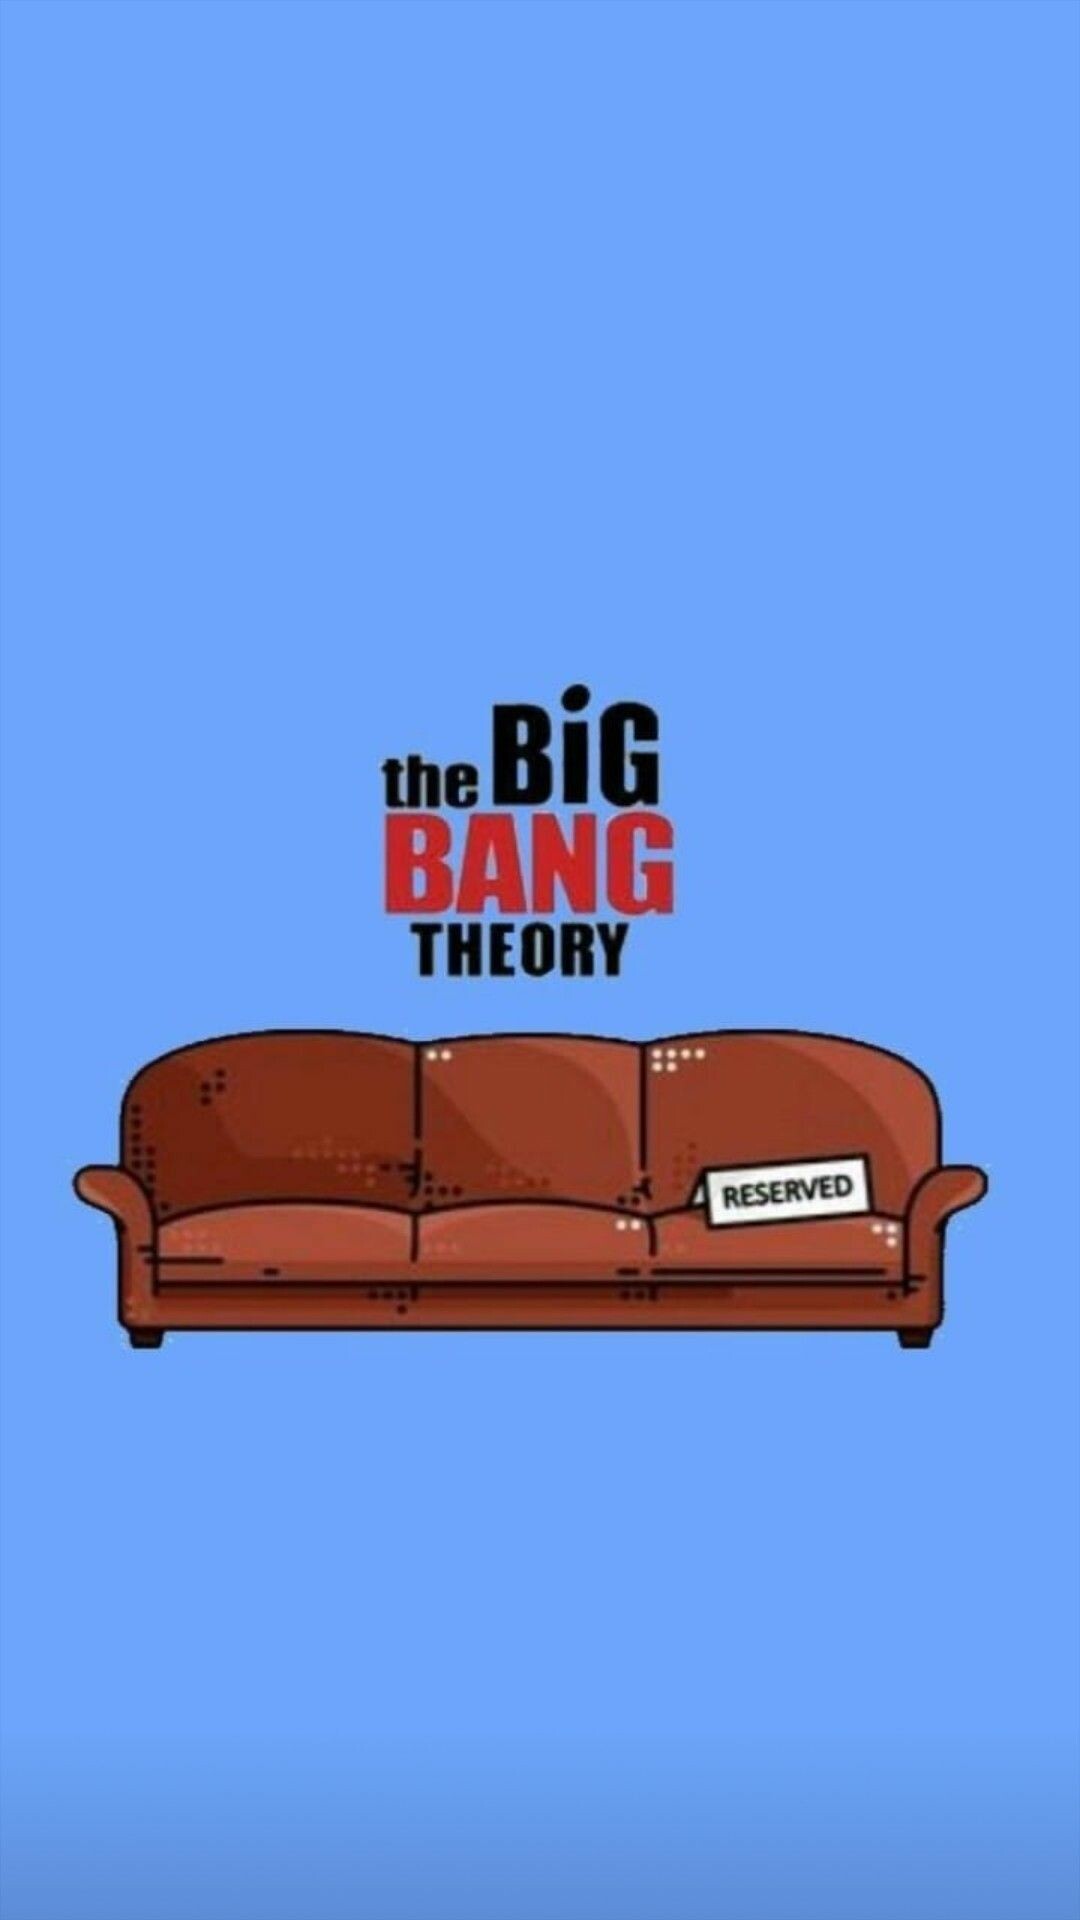 The Big Bang Theory TV show, Geek culture, Hilarious sitcom, Nerd references, 1080x1920 Full HD Phone